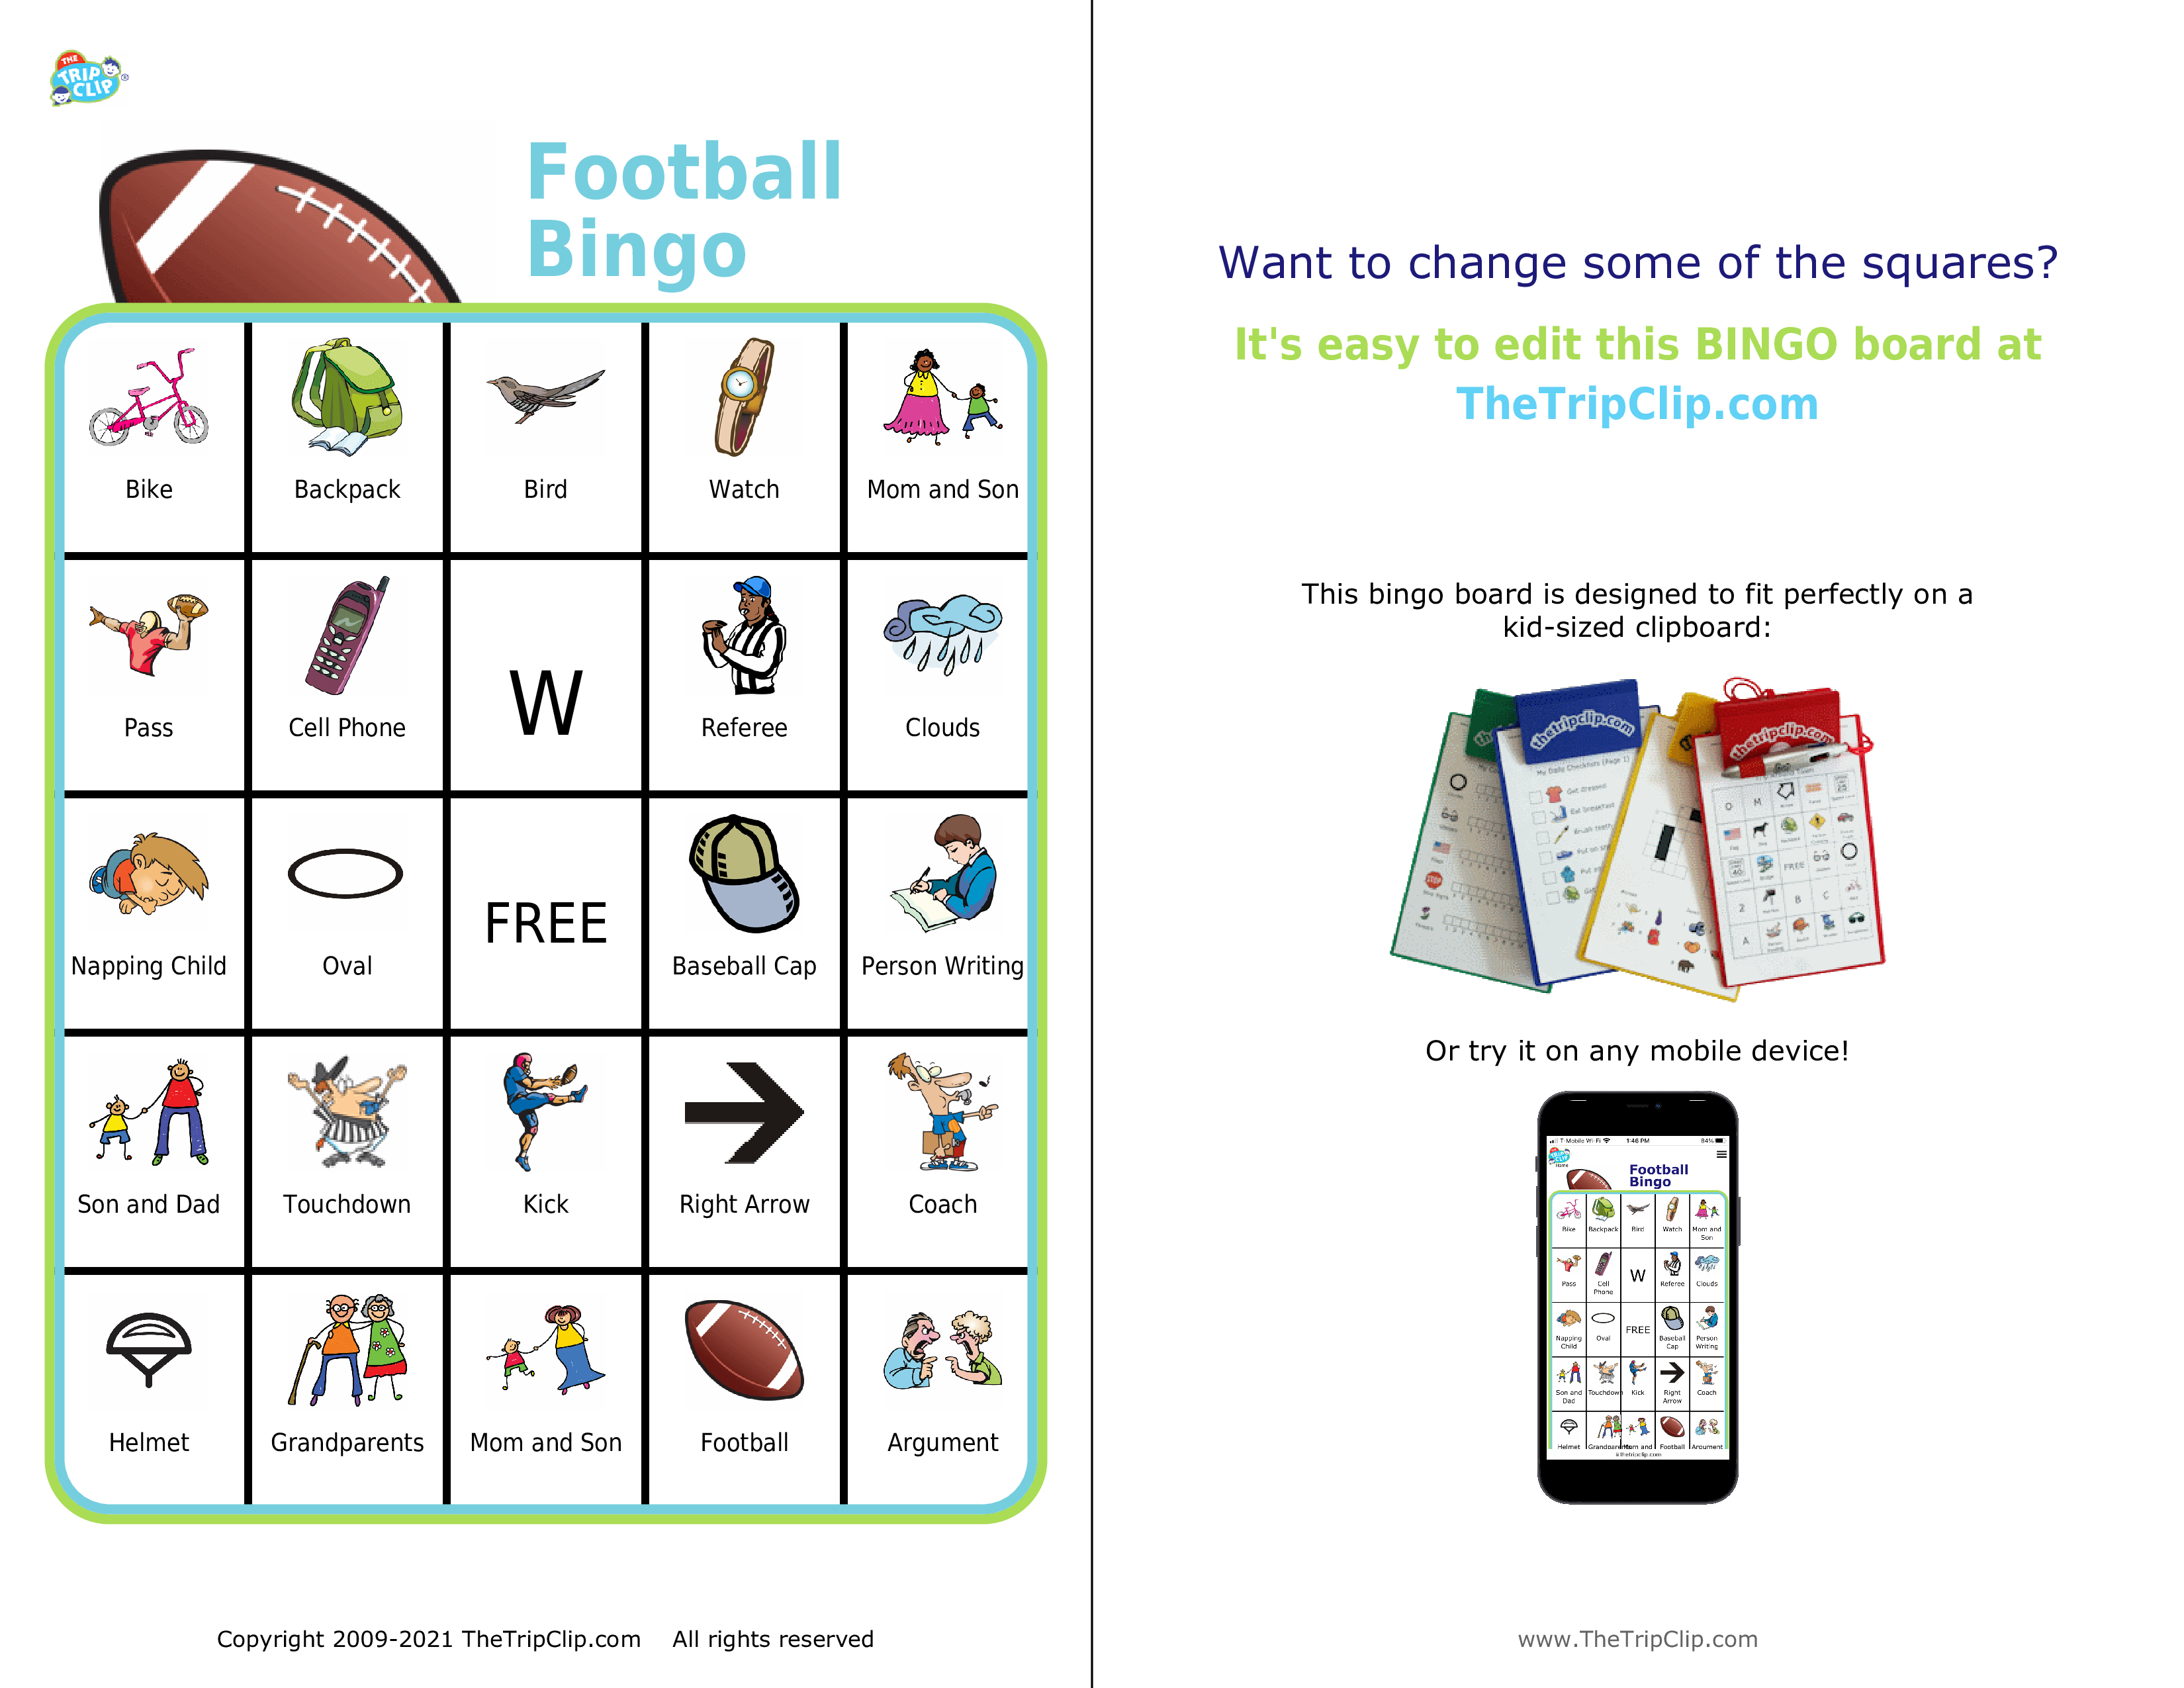 Bingo board with football at the top and titled Football Bingo